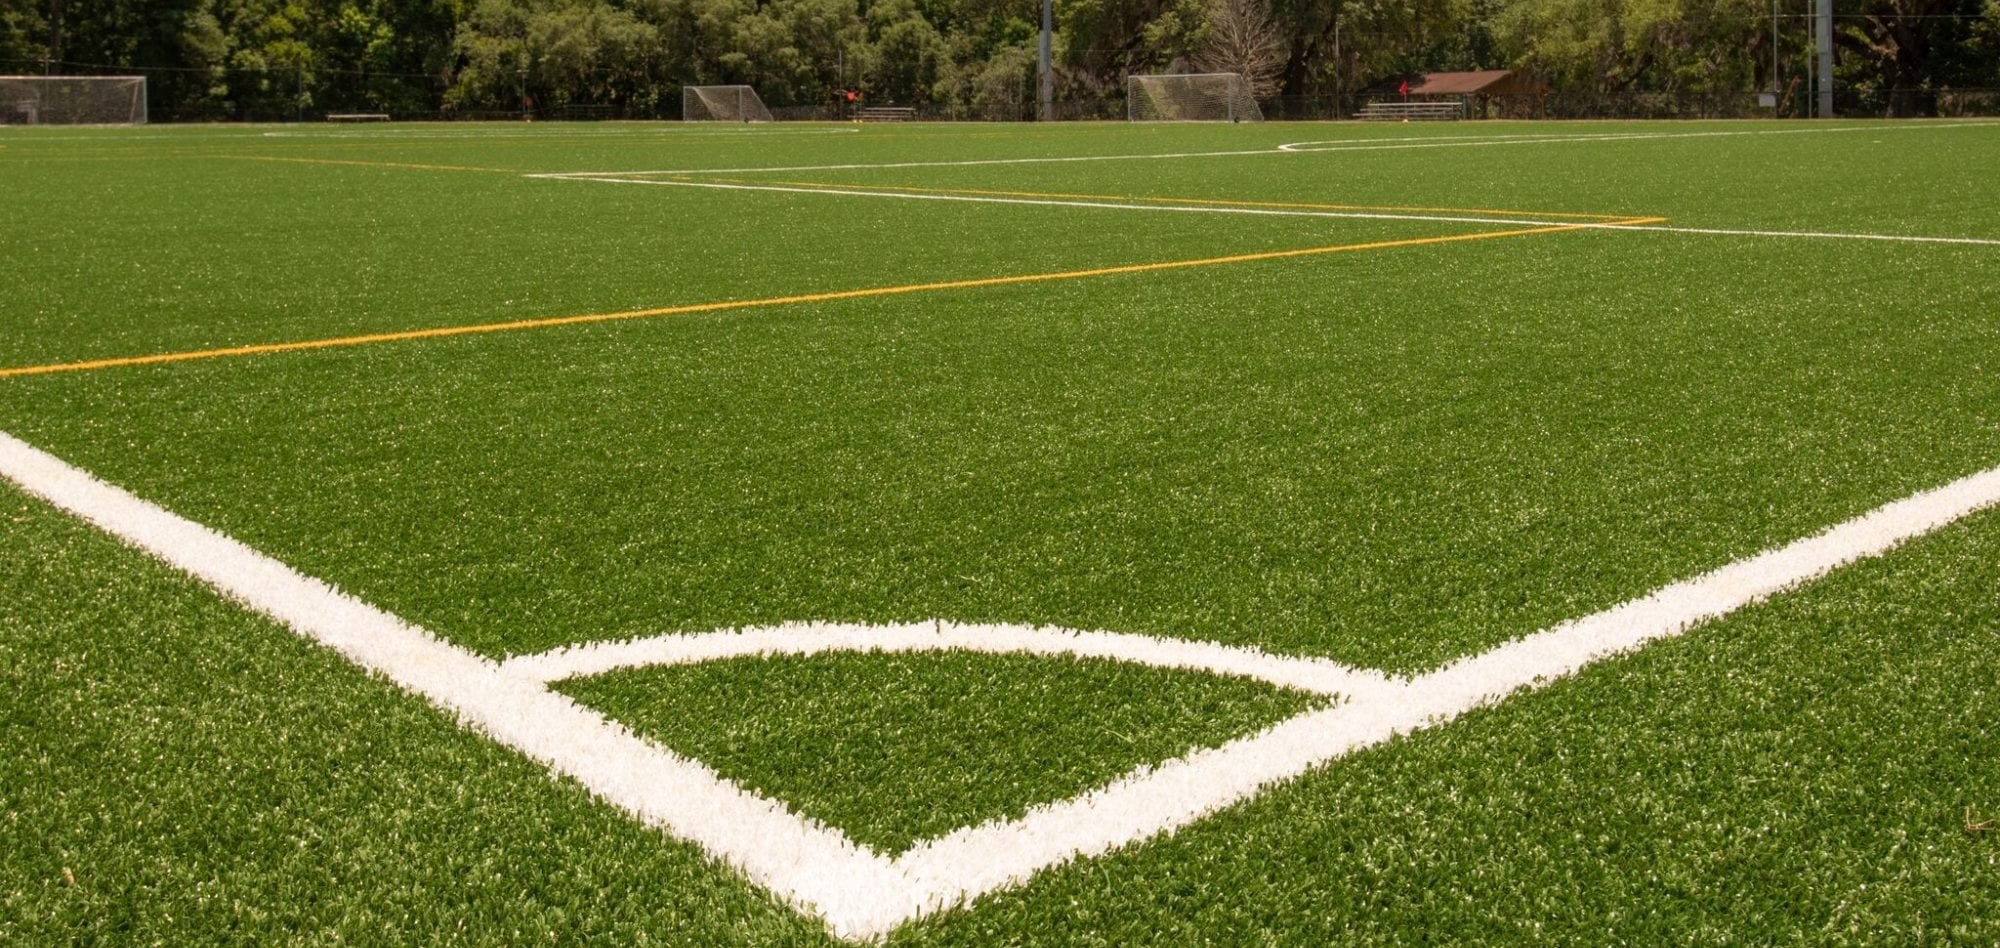 City of McAllen to Inaugurate New Uvalde Soccer Fields